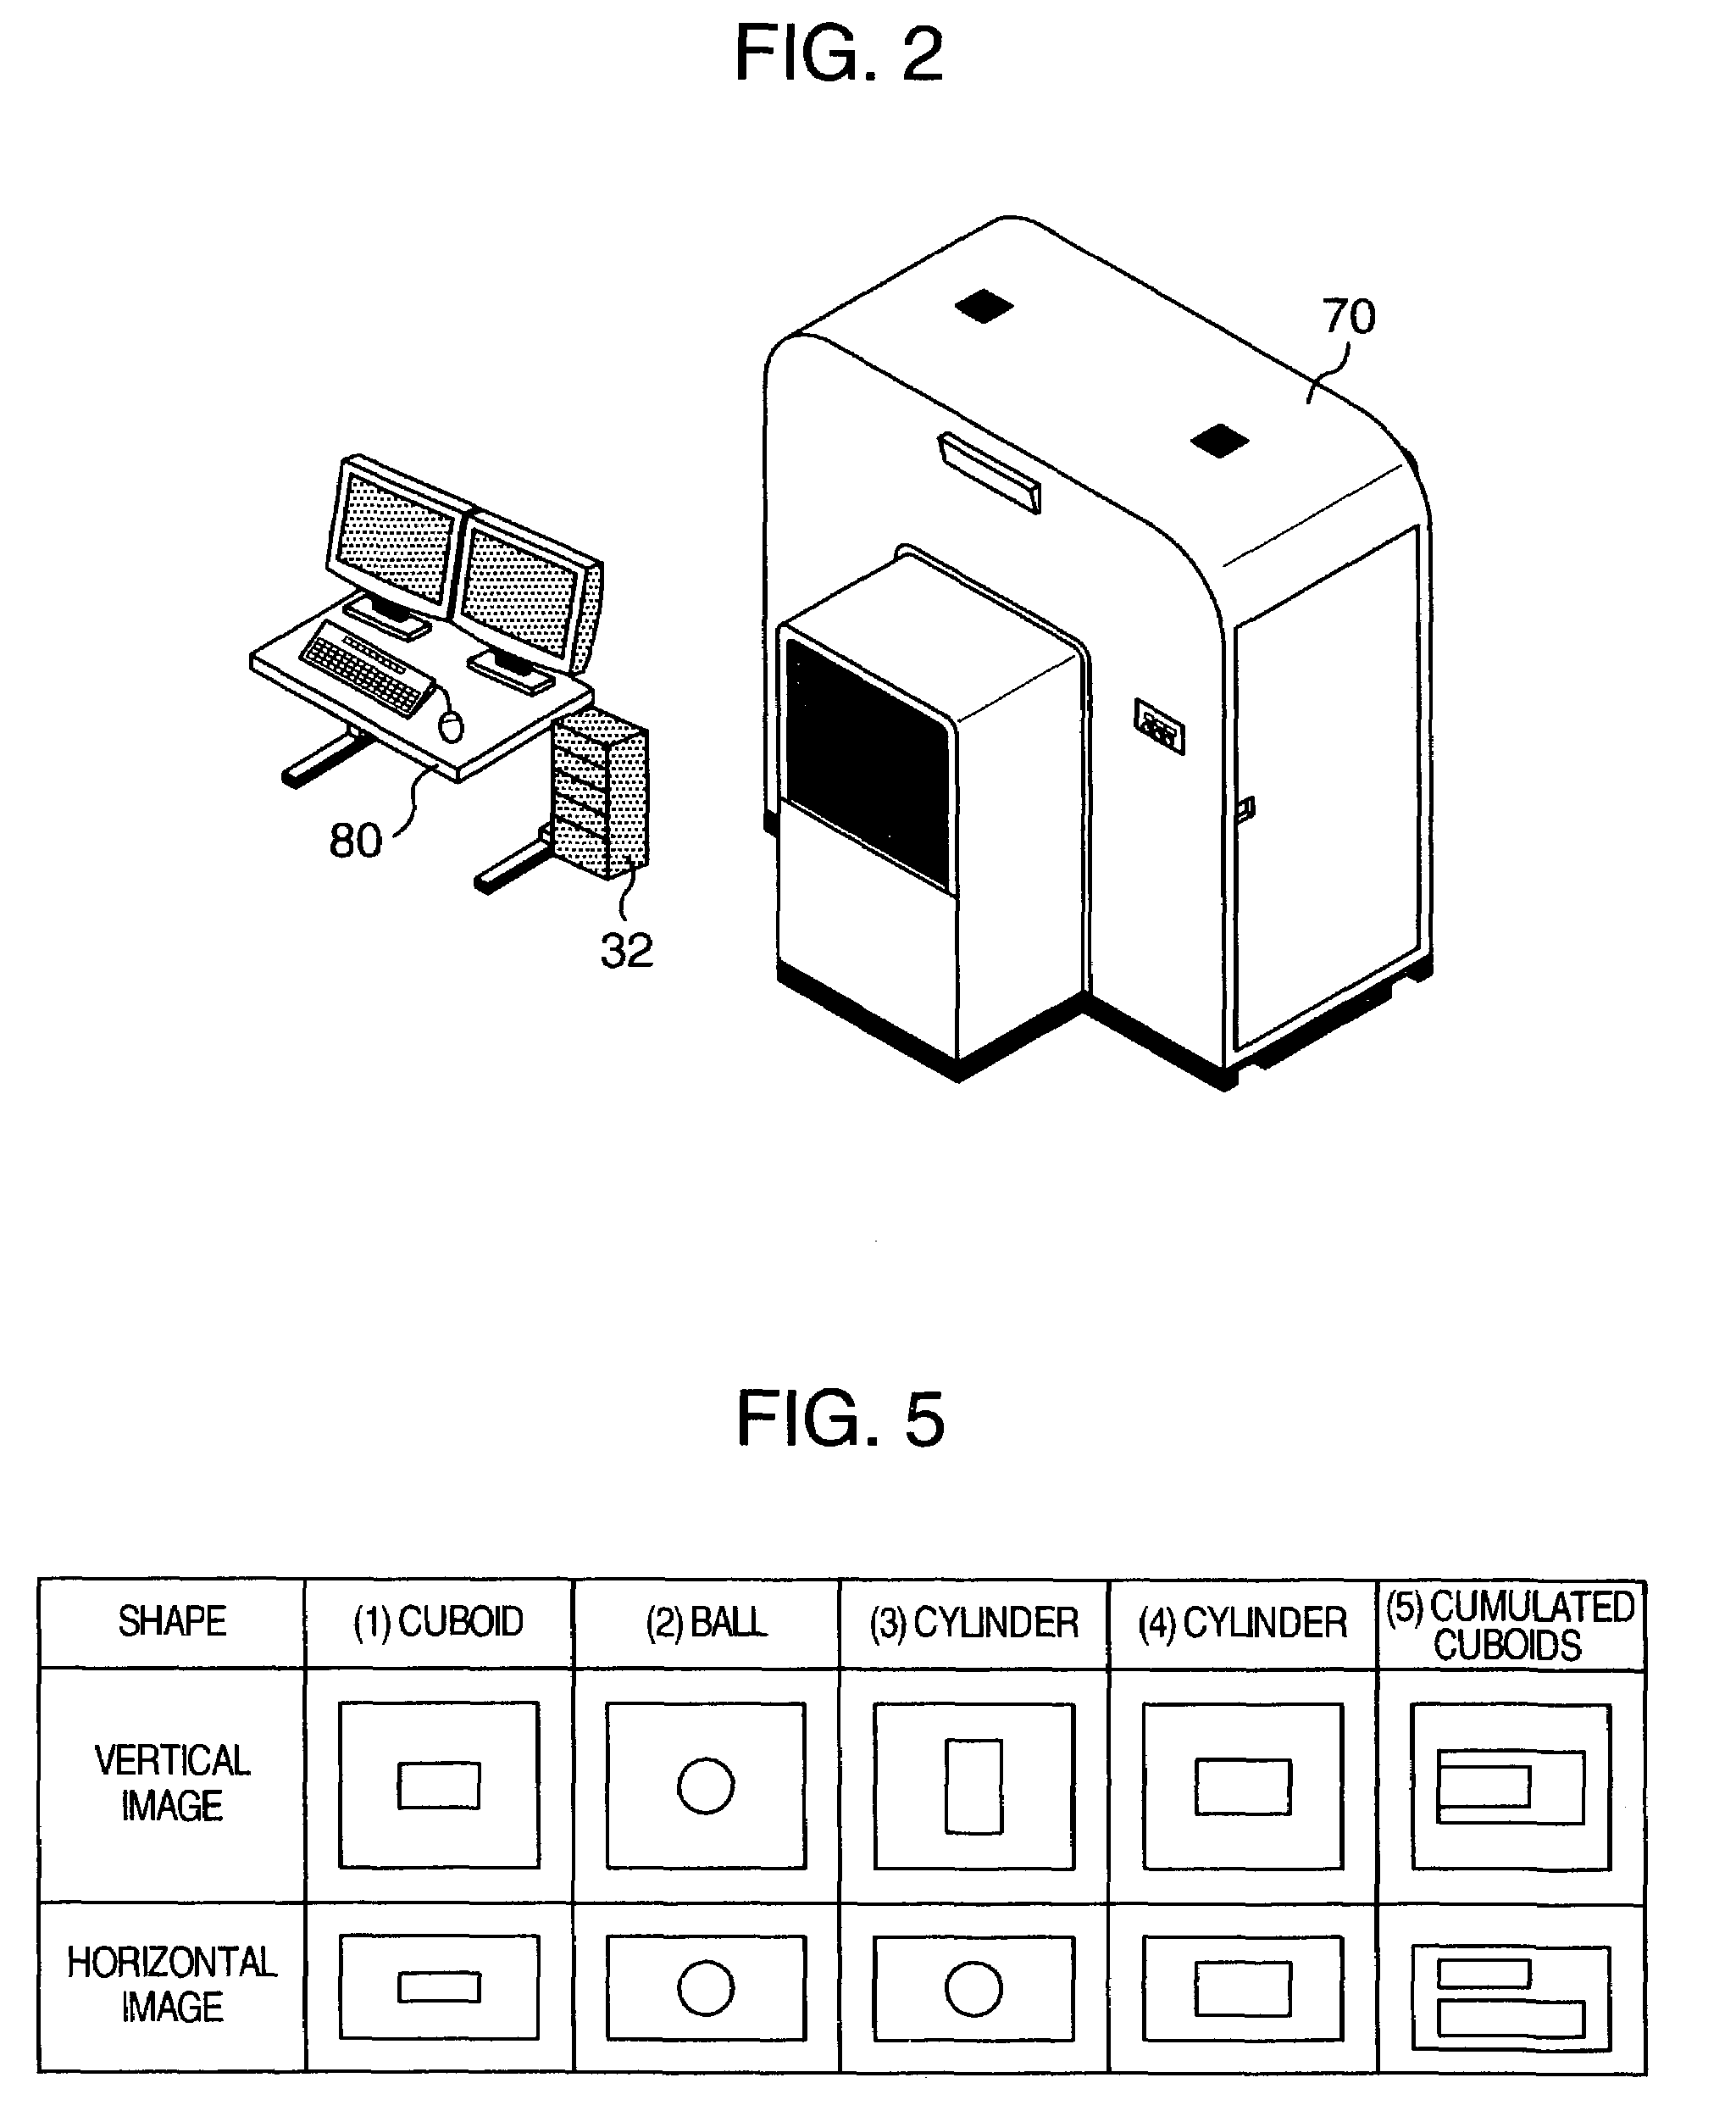 Apparatus and method for detecting threats